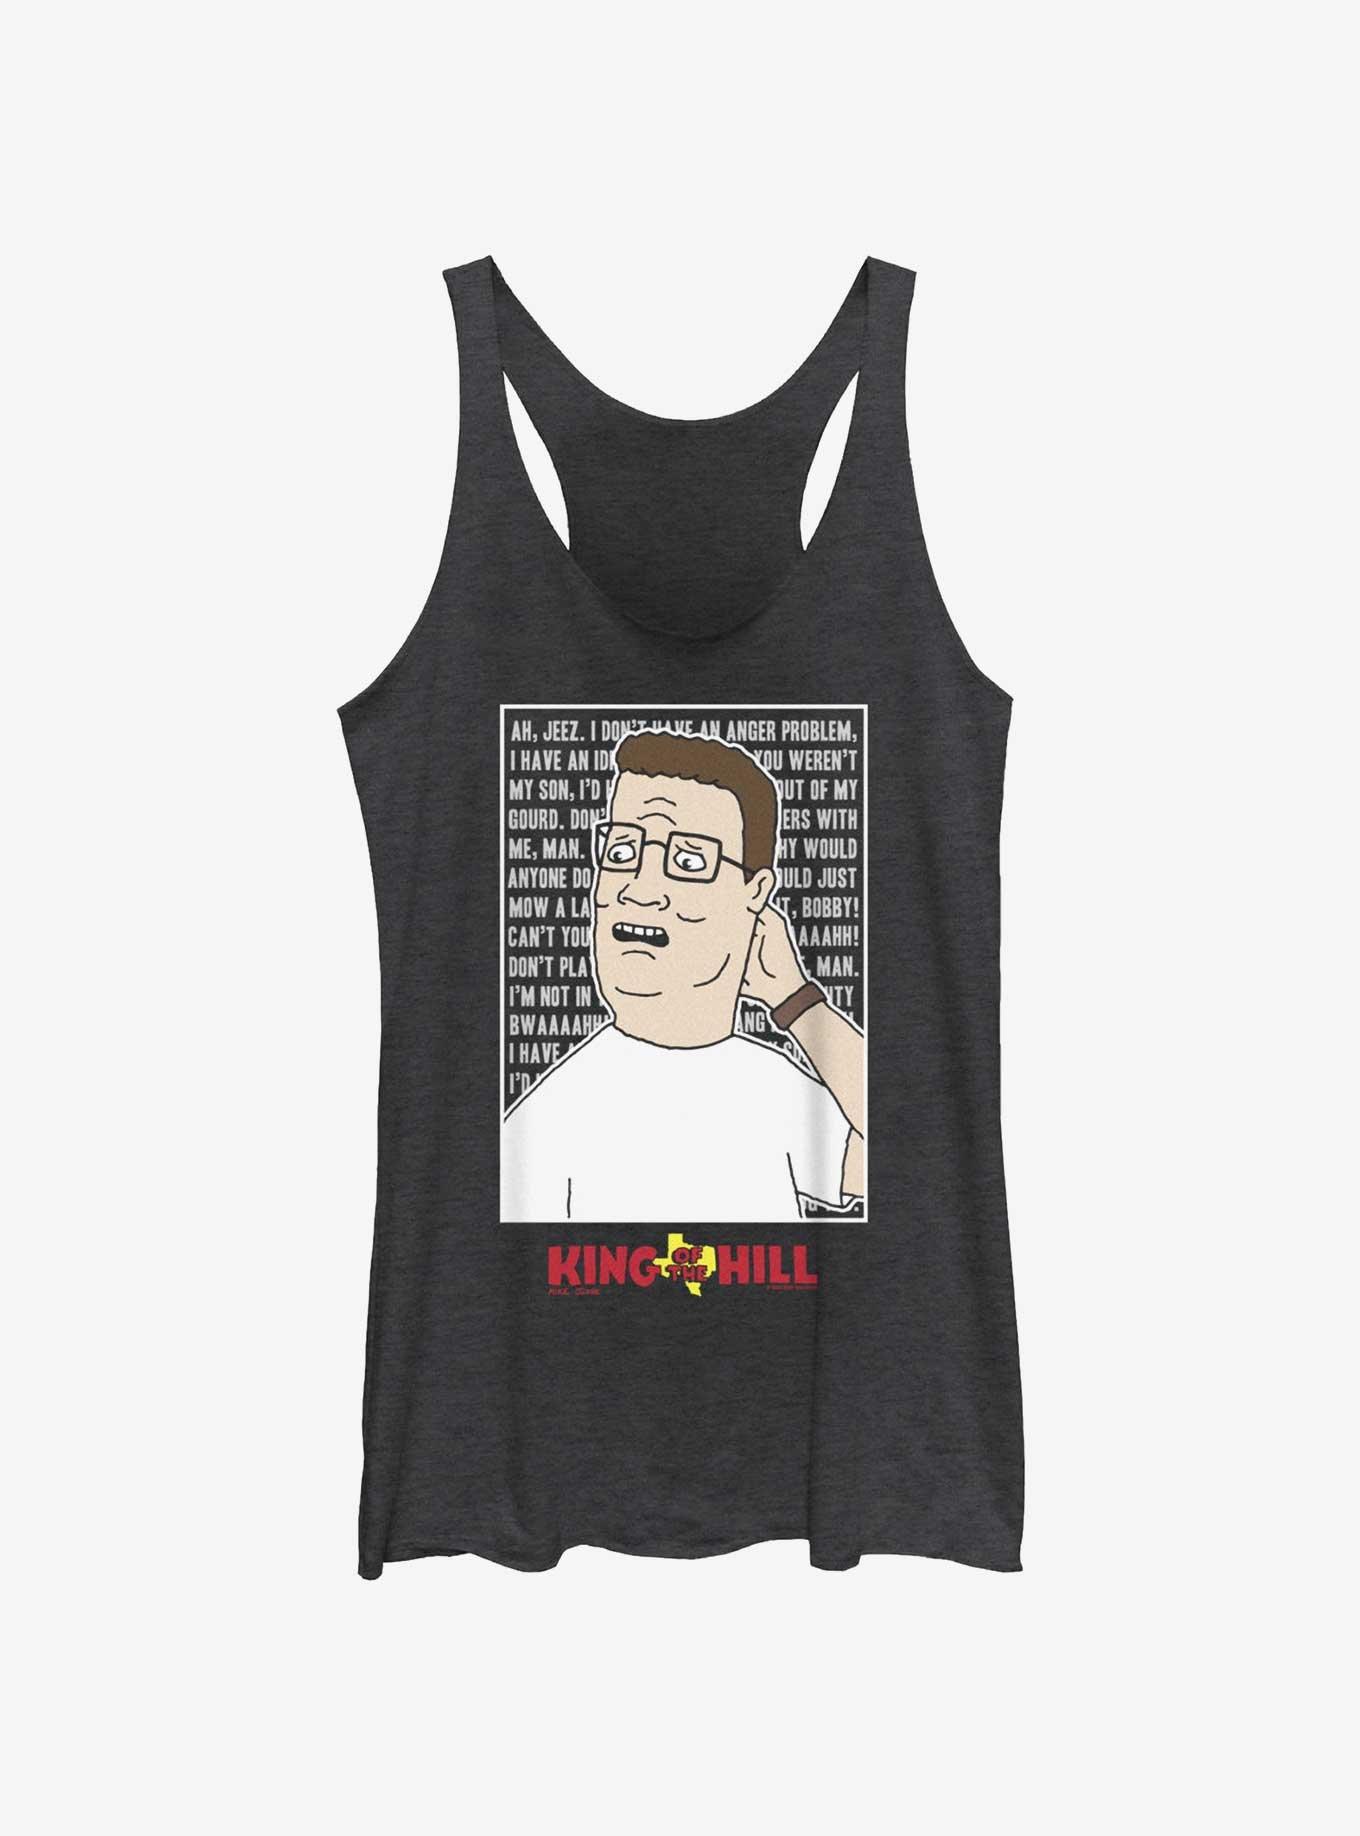 King of the Hill Hank Hill Quote Poster Women's Tank Top, , hi-res